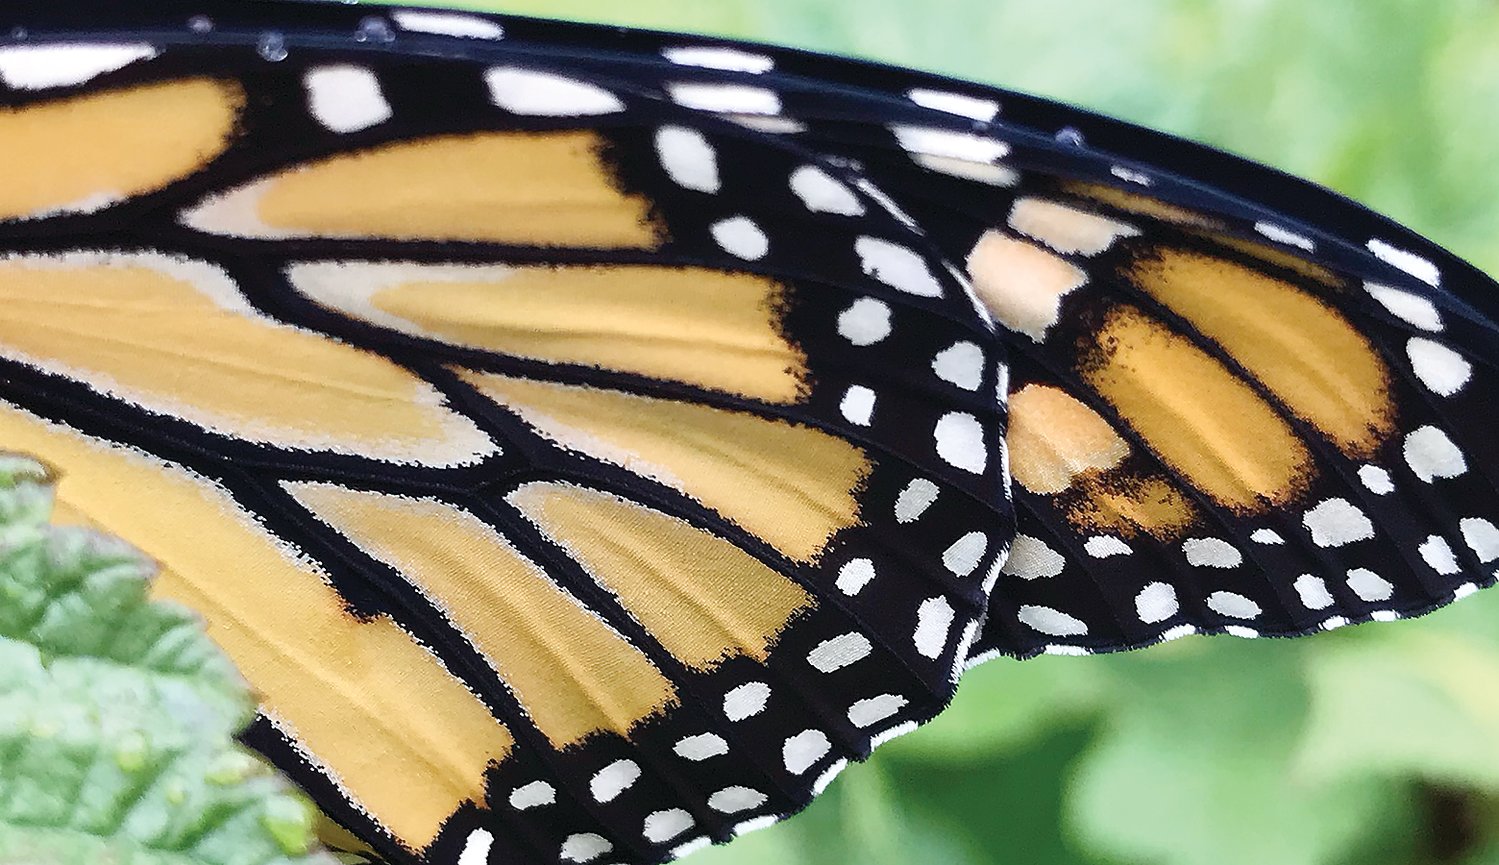 The distinctive pattern of the Monarch butterfly wing.